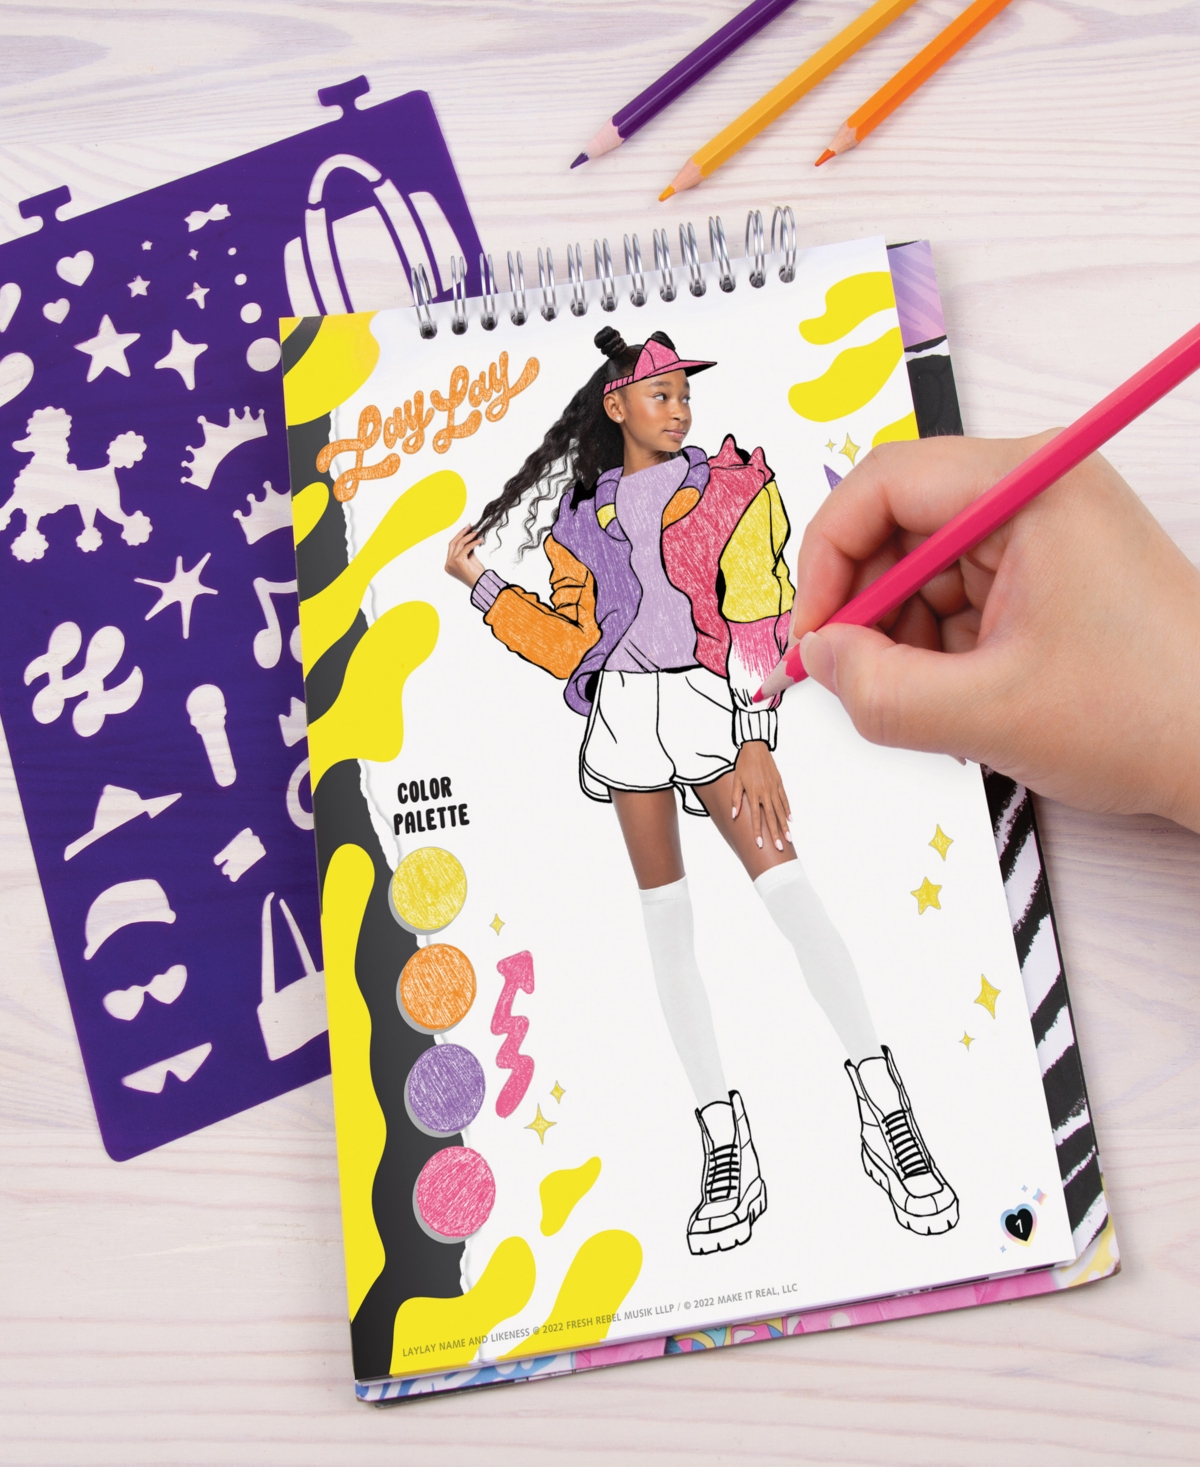 Shop That Girl Lay Lay Fashion Design Sketchbook Make It Real, Nickelodeon, Includes 214 Stickers Stencils, Draw Sketch Cre In Multi